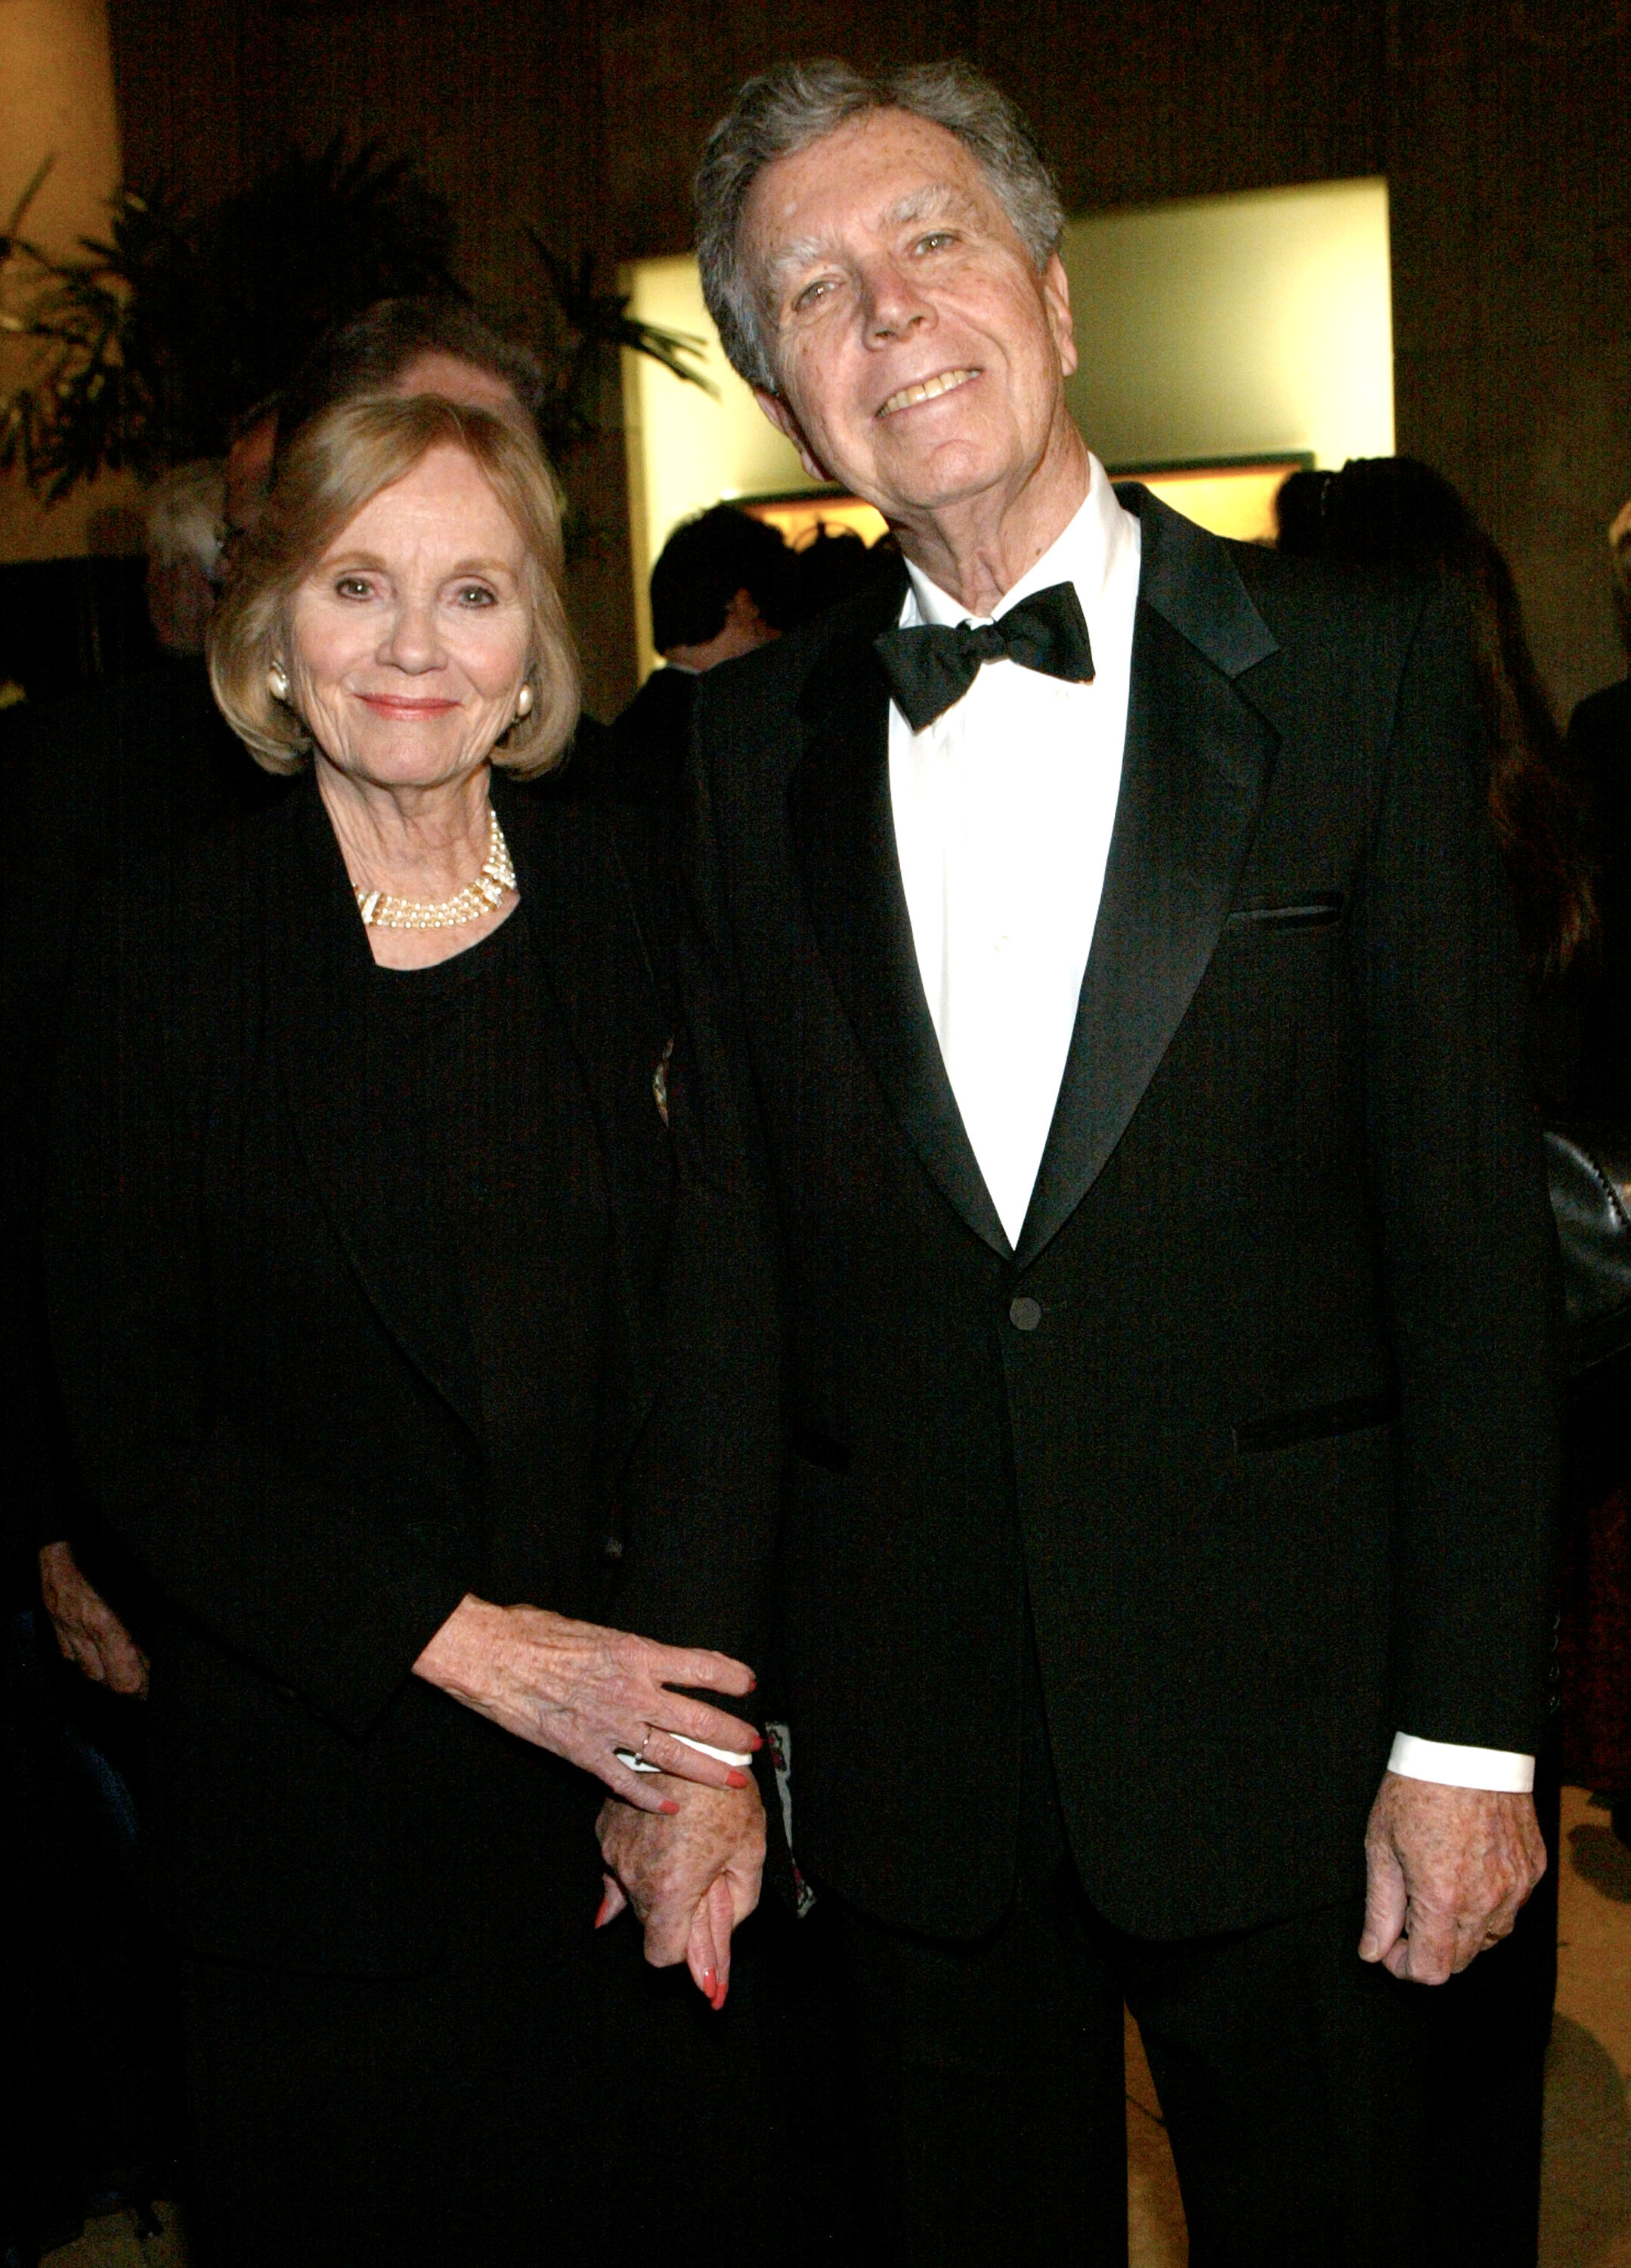 ‘I Miss Him': Eva Marie Saint on Late Spouse of 65 Years Who Took Care ...